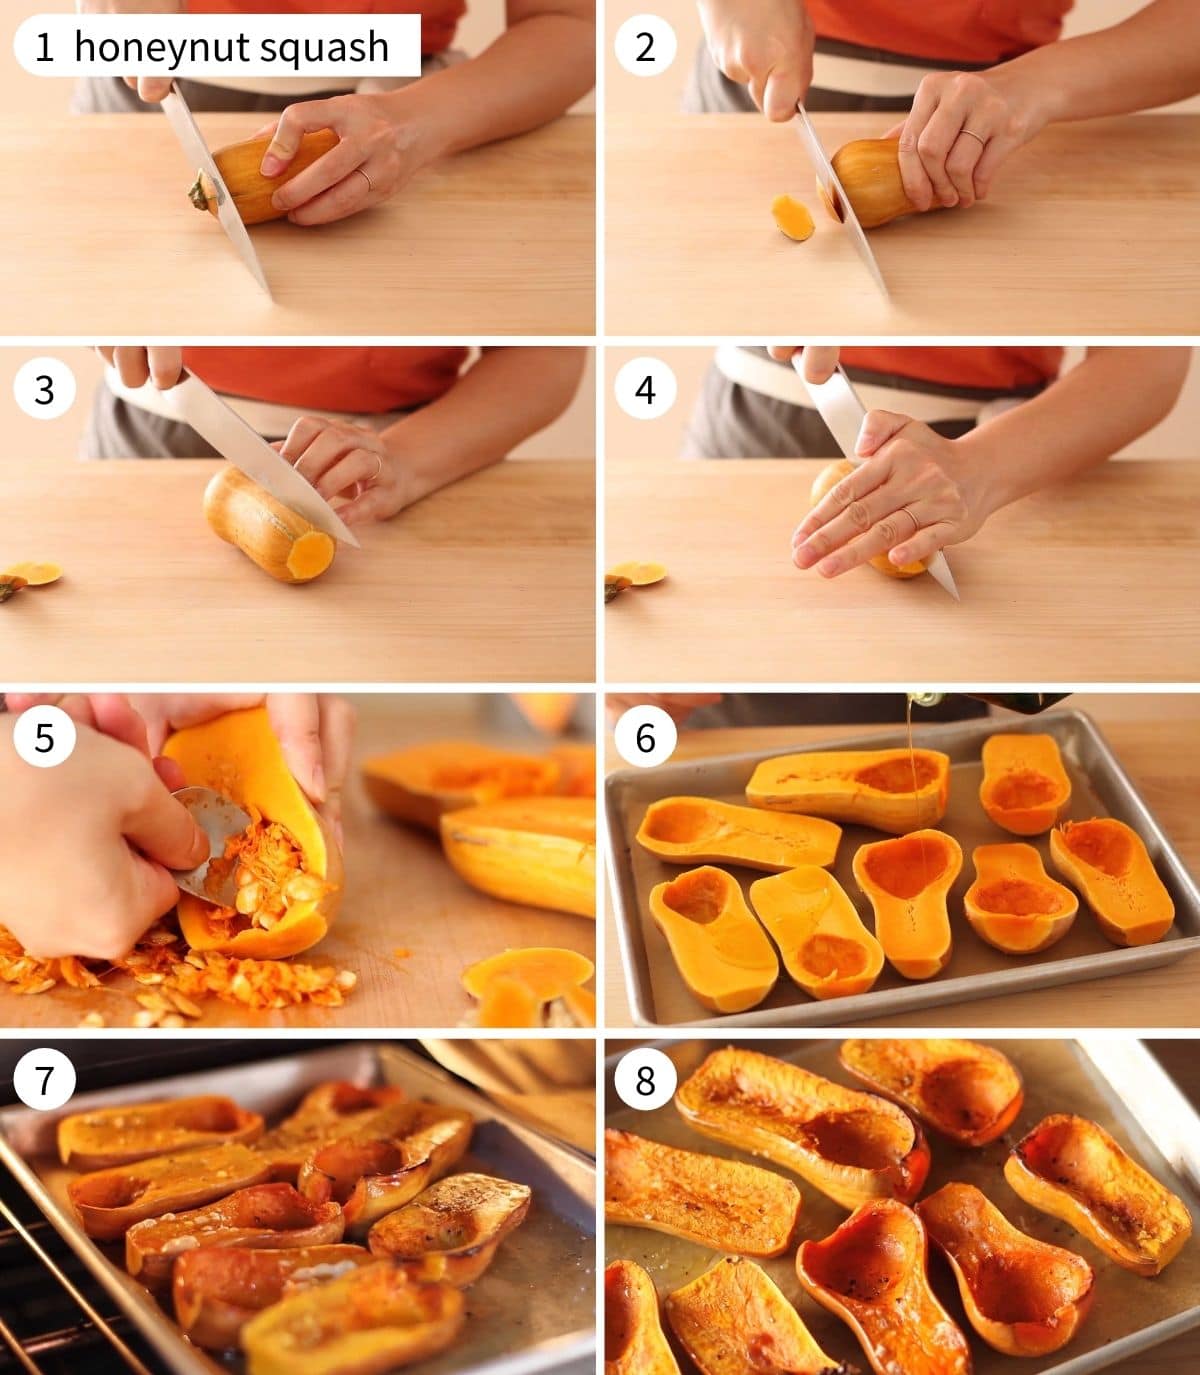 8 step-by-step photos showing how to cut and roast honeynut squash.